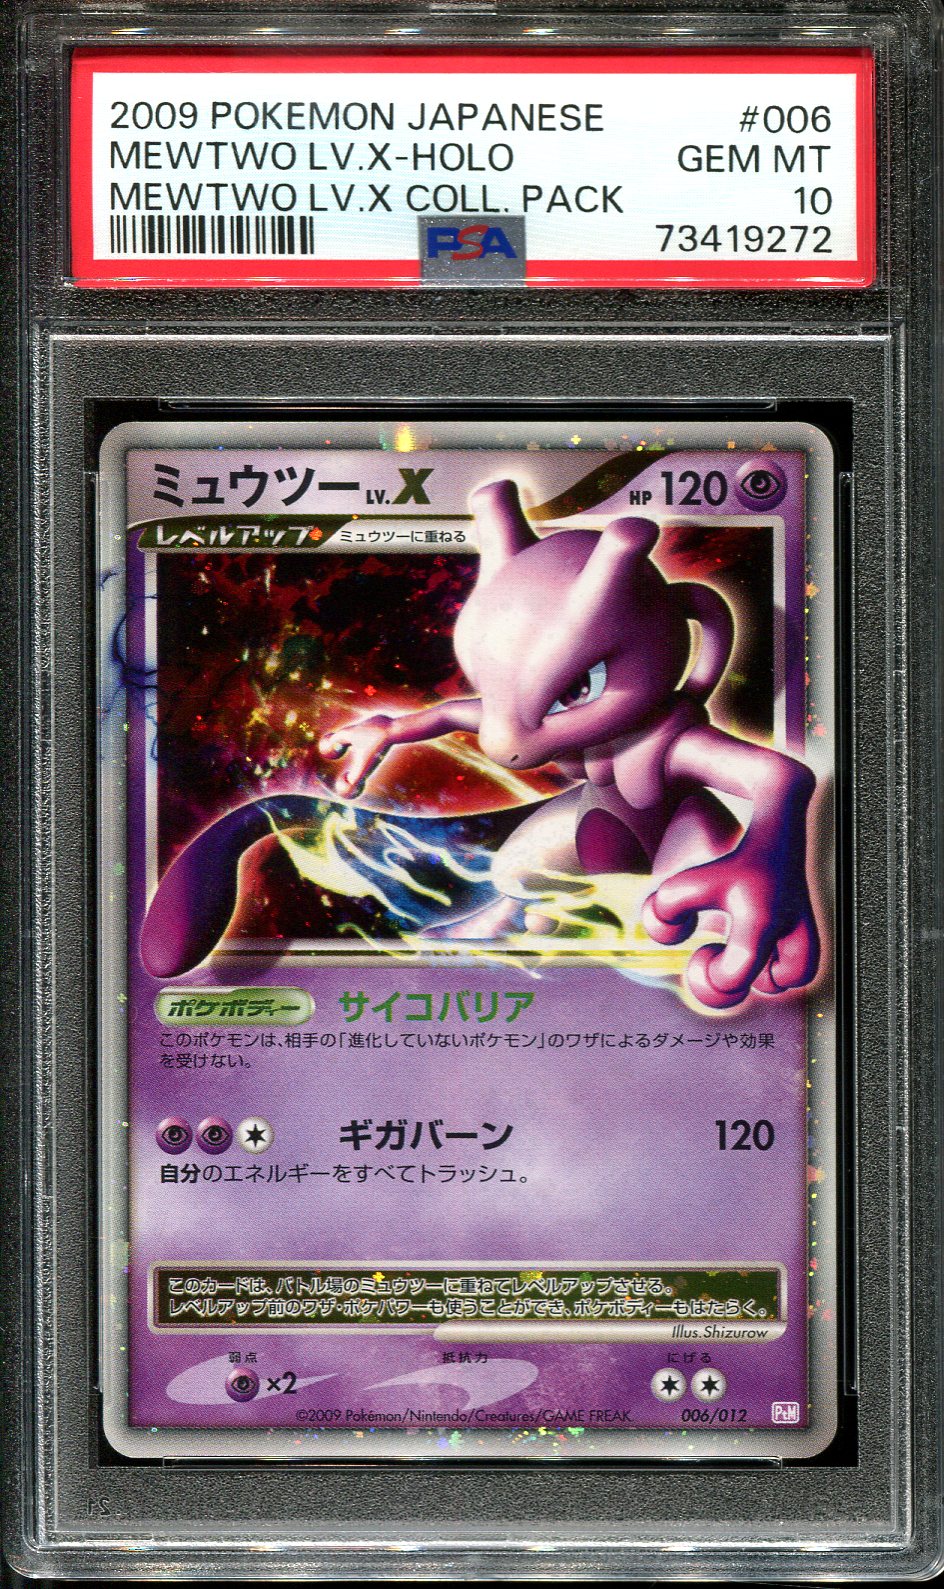 MEWTWO LV X 006/012 PSA 10 POKEMON COLLECTION PACK PtM JAPANESE HOLO